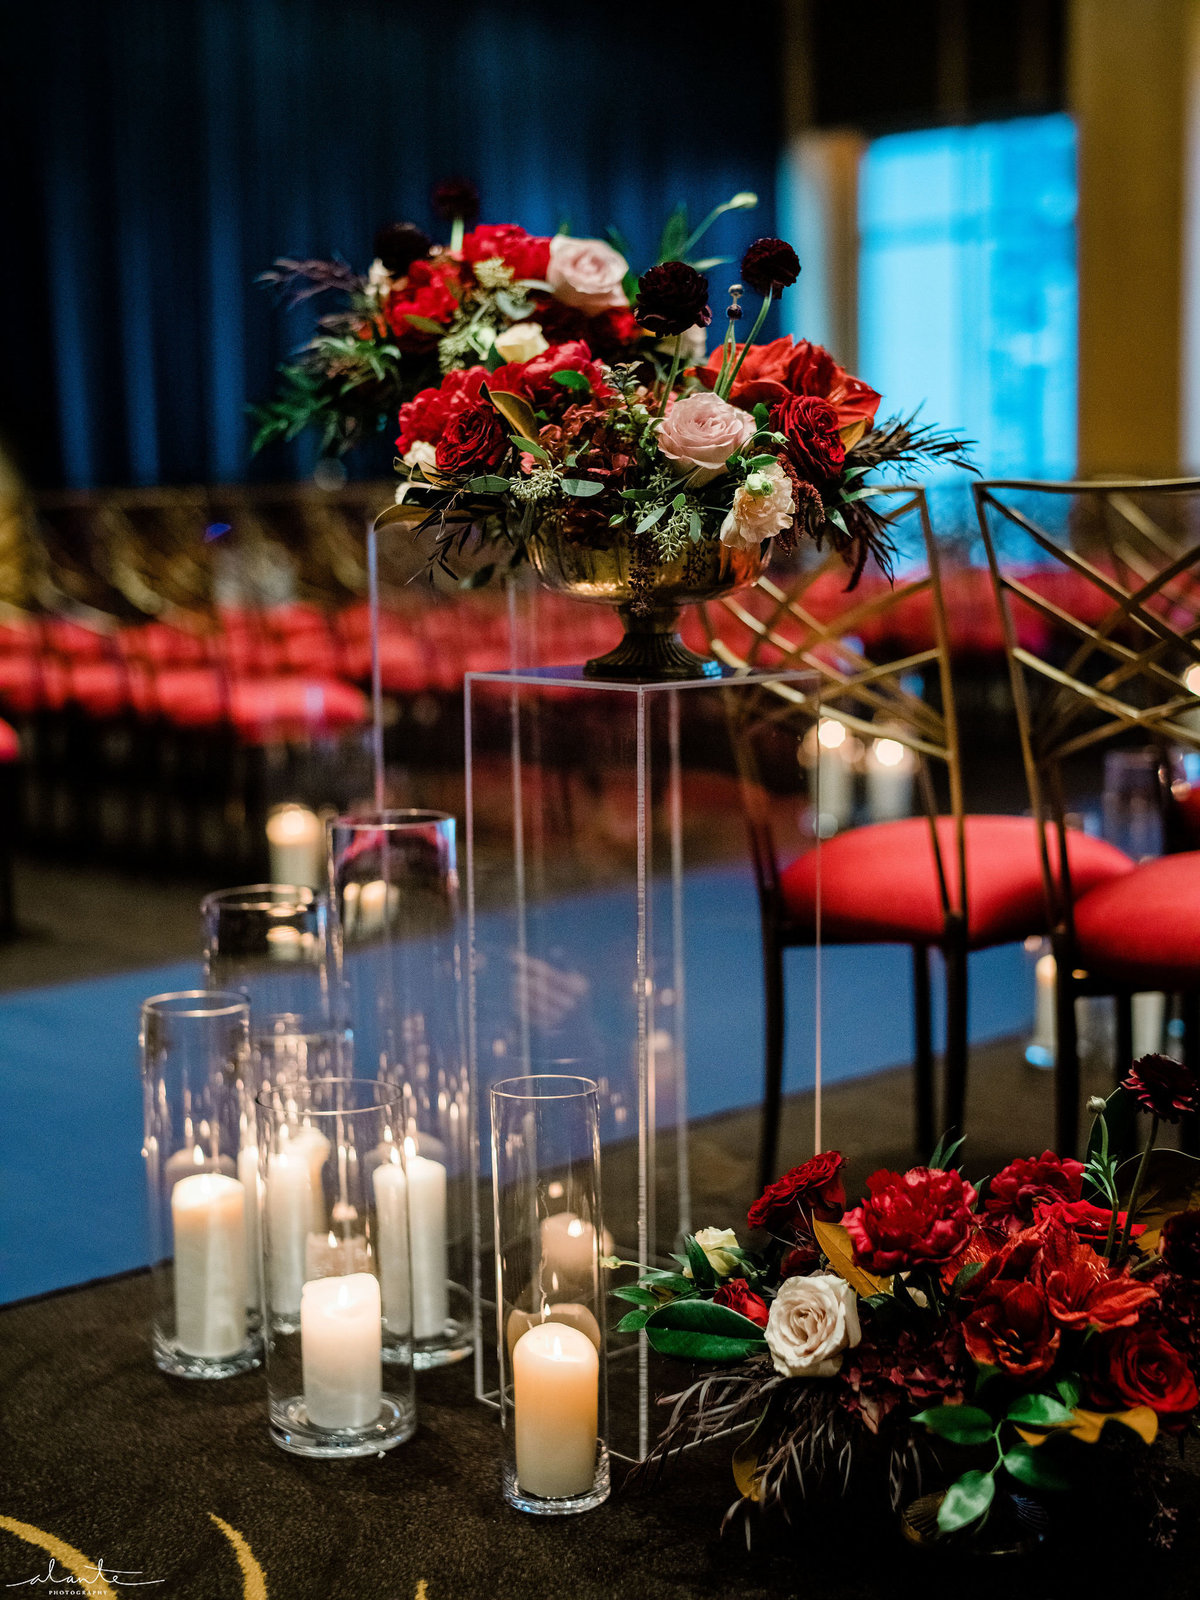 Aisle entrance decor with lucite flower stand, red winter flowers, hurricane candles, and Chameleon chairs with red seat cushion